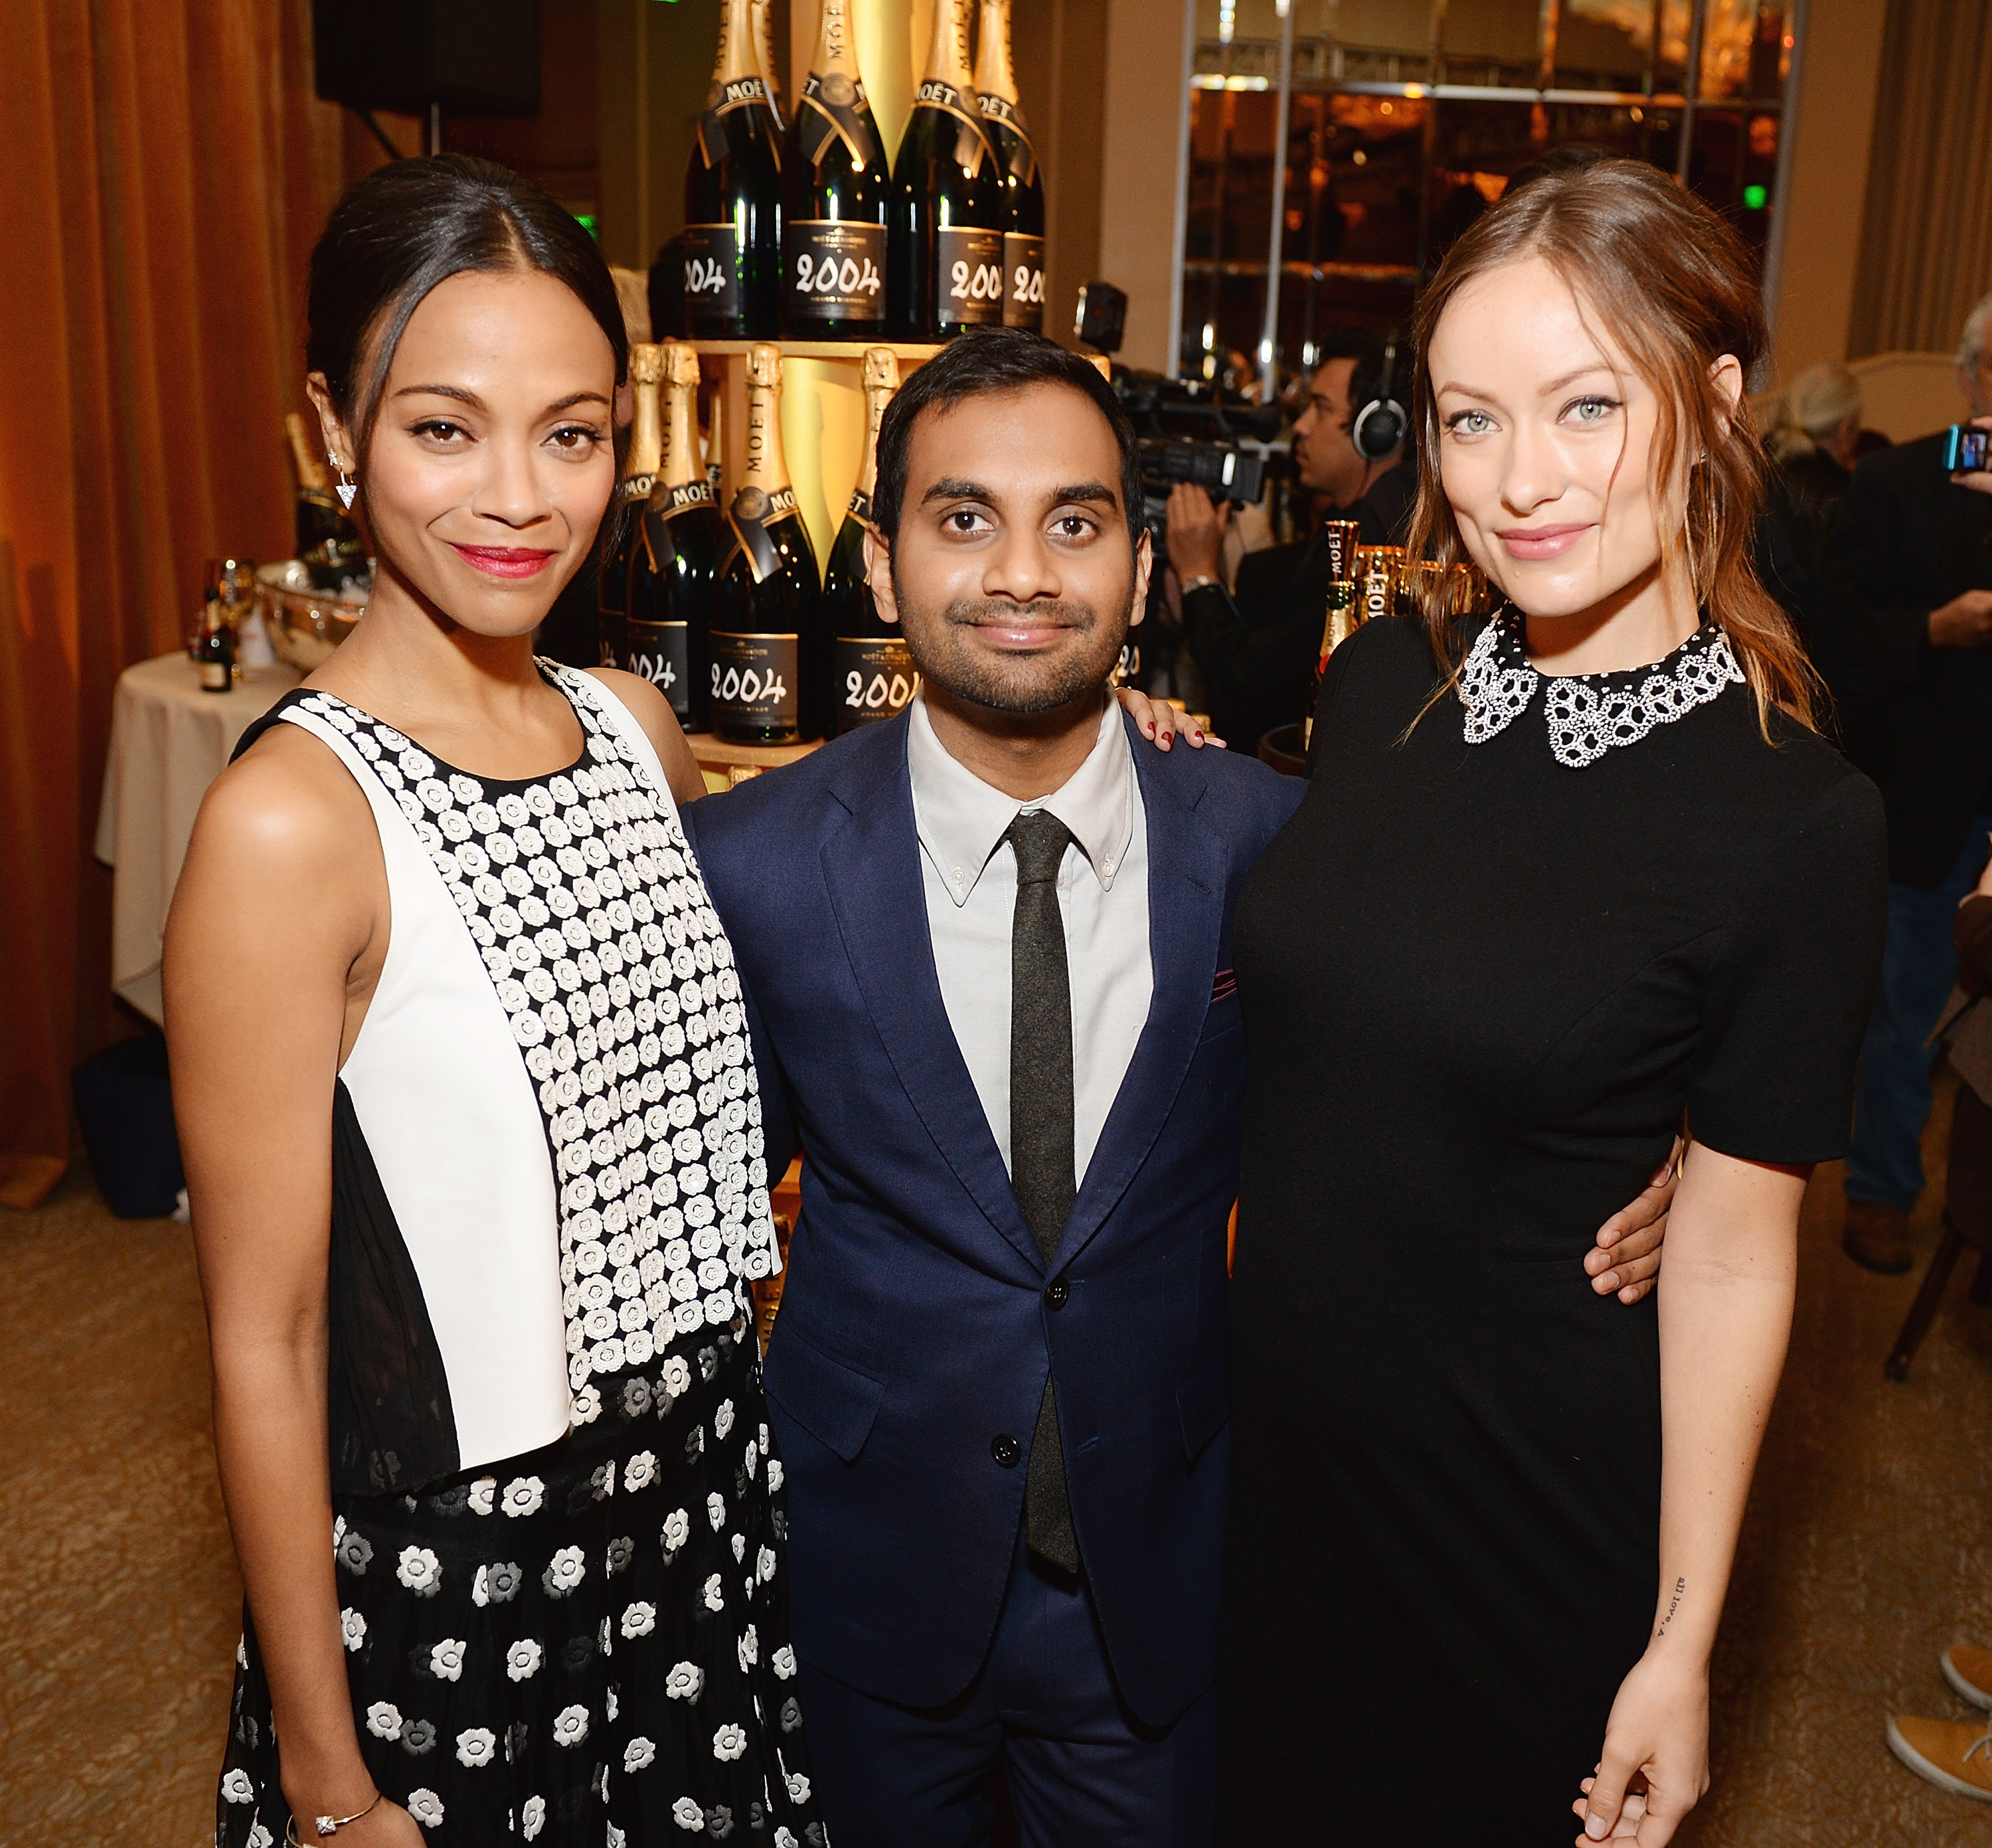 BEVERLY HILLS, CA - DECEMBER 11:  (L-R) Actors Zoe Saldana, Aziz Ansari and Olivia Wilde toast the 71st Annual Golden Globe Nominations with Moet & Chandon at the The Beverly Hilton on December 11, 2013 in Beverly Hills, California.  (Photo by Michael Kovac/WireImage)